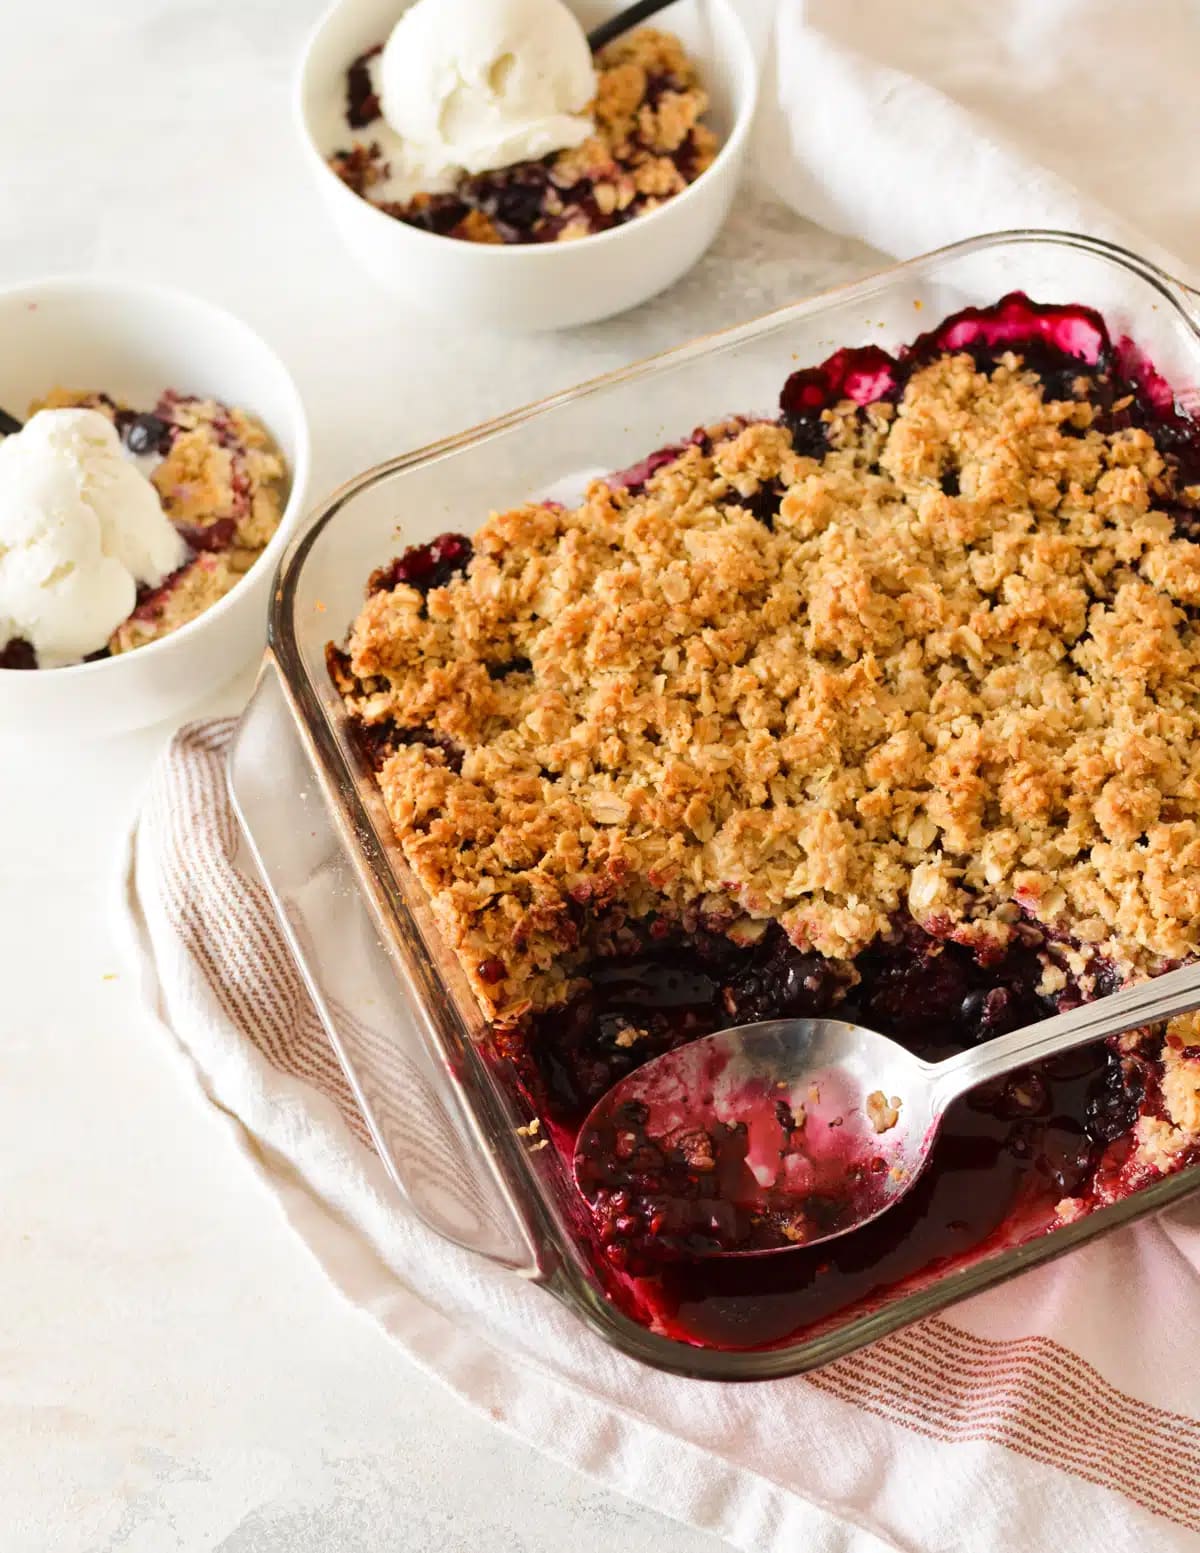 Triple berry crisp with oat crumble